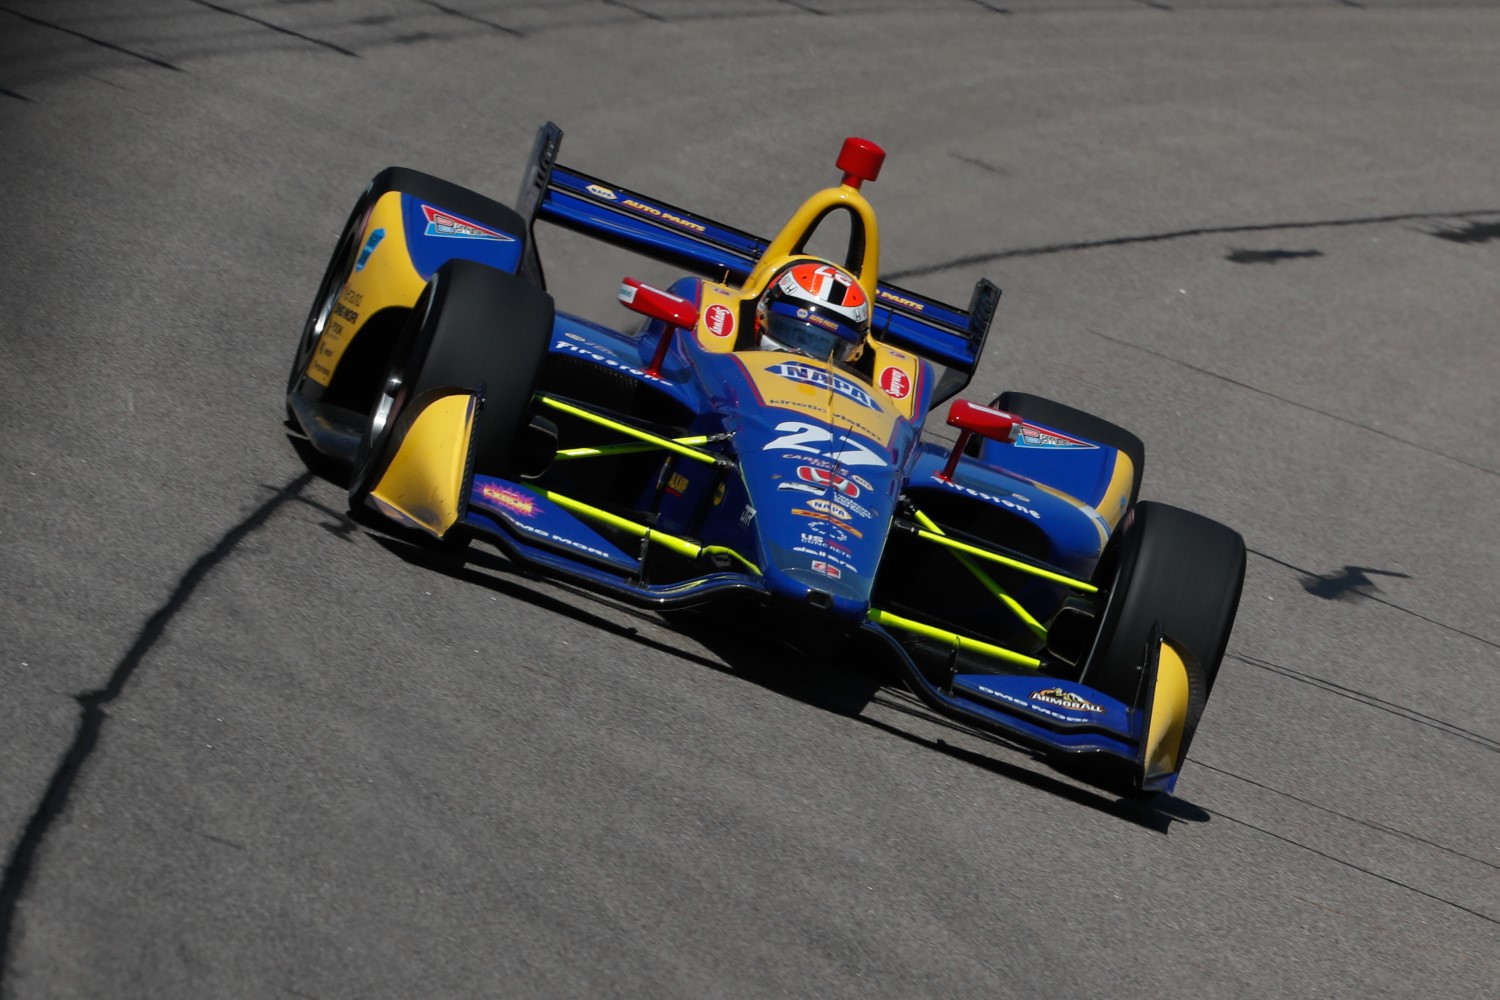 The Andretti team has stuggled a bit at Iowa recently - can they recover?